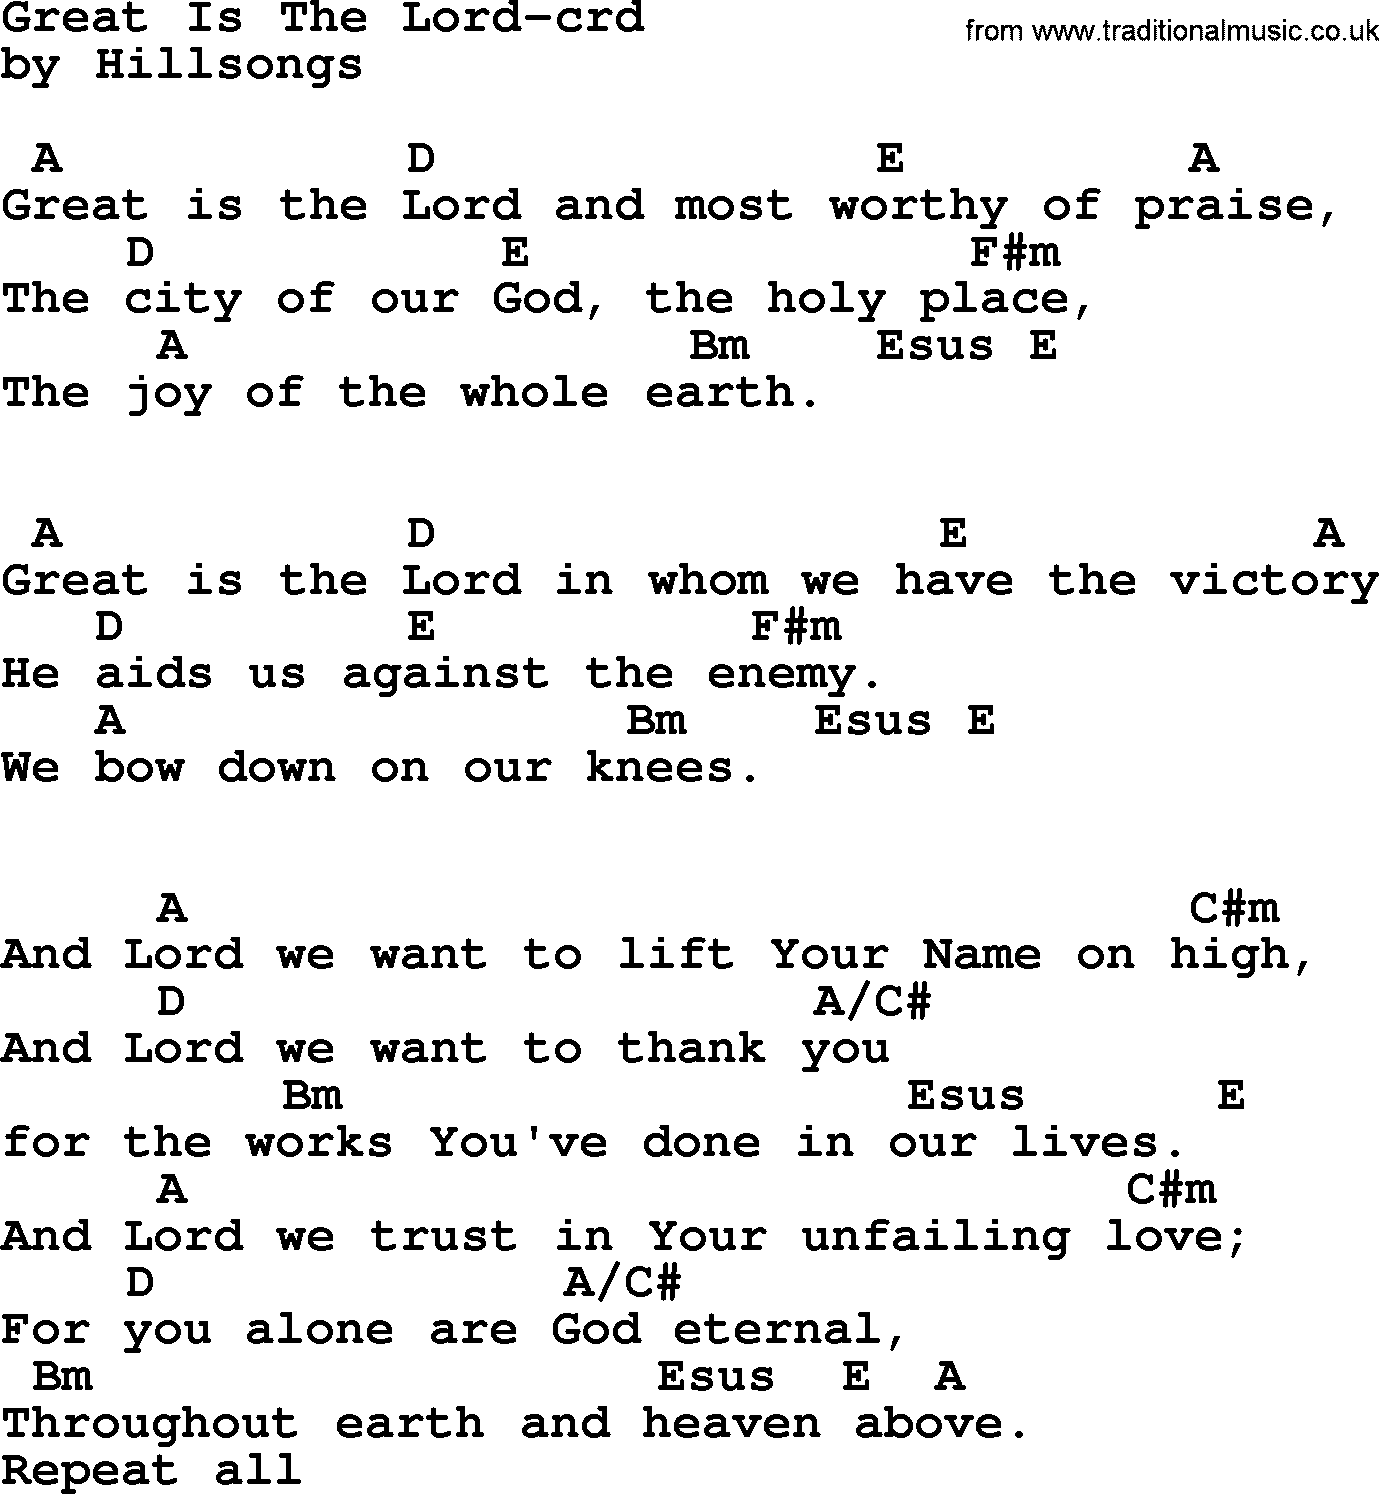 Top 500 Hymn: Great Is The Lord, lyrics and chords